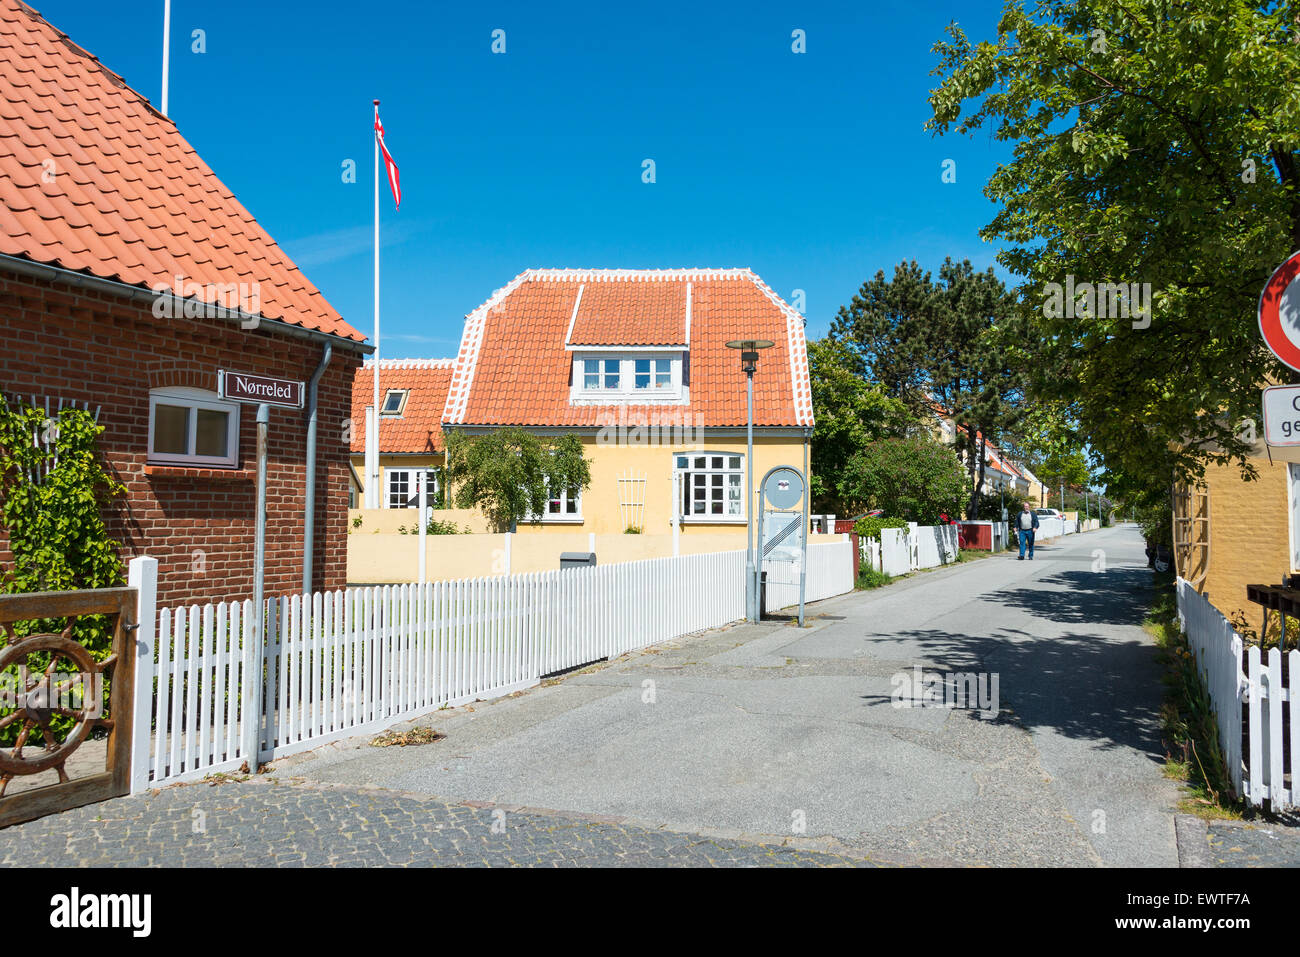 Typical Skagen street and houses with red-tiled roofs and white picket fences, Skagen, North Jutland Region, Denmark Stock Photo